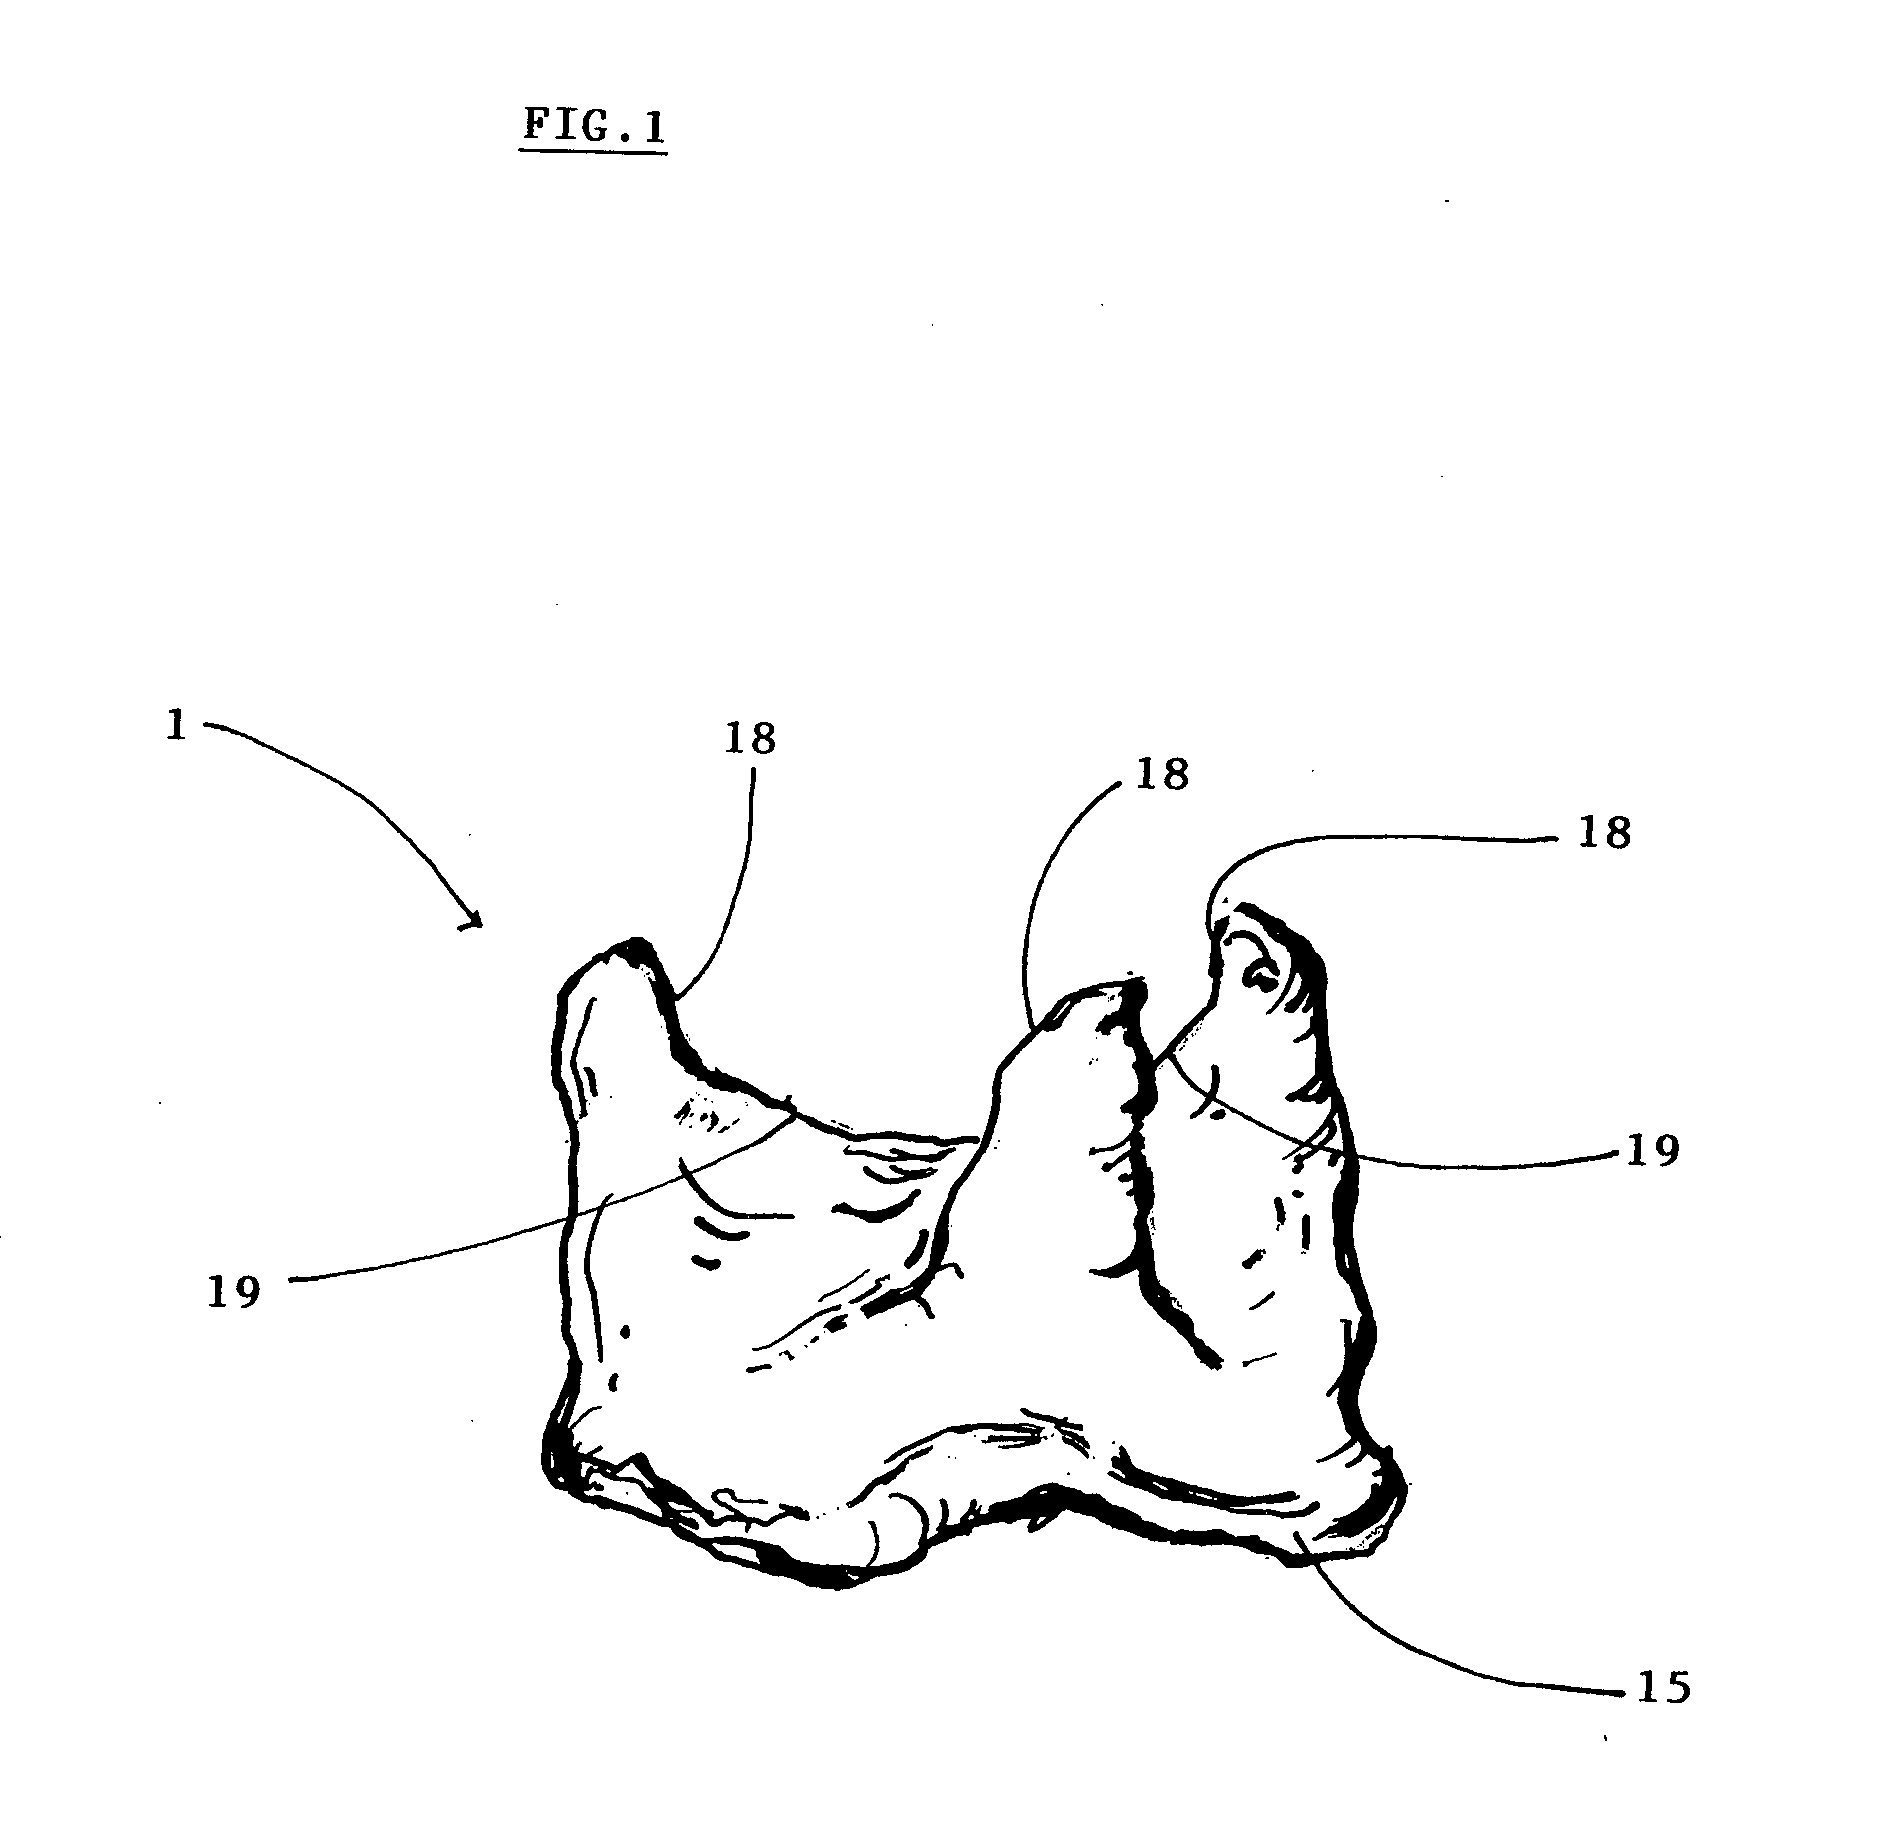 Pericardial heart valve replacement and methods of constructing the same